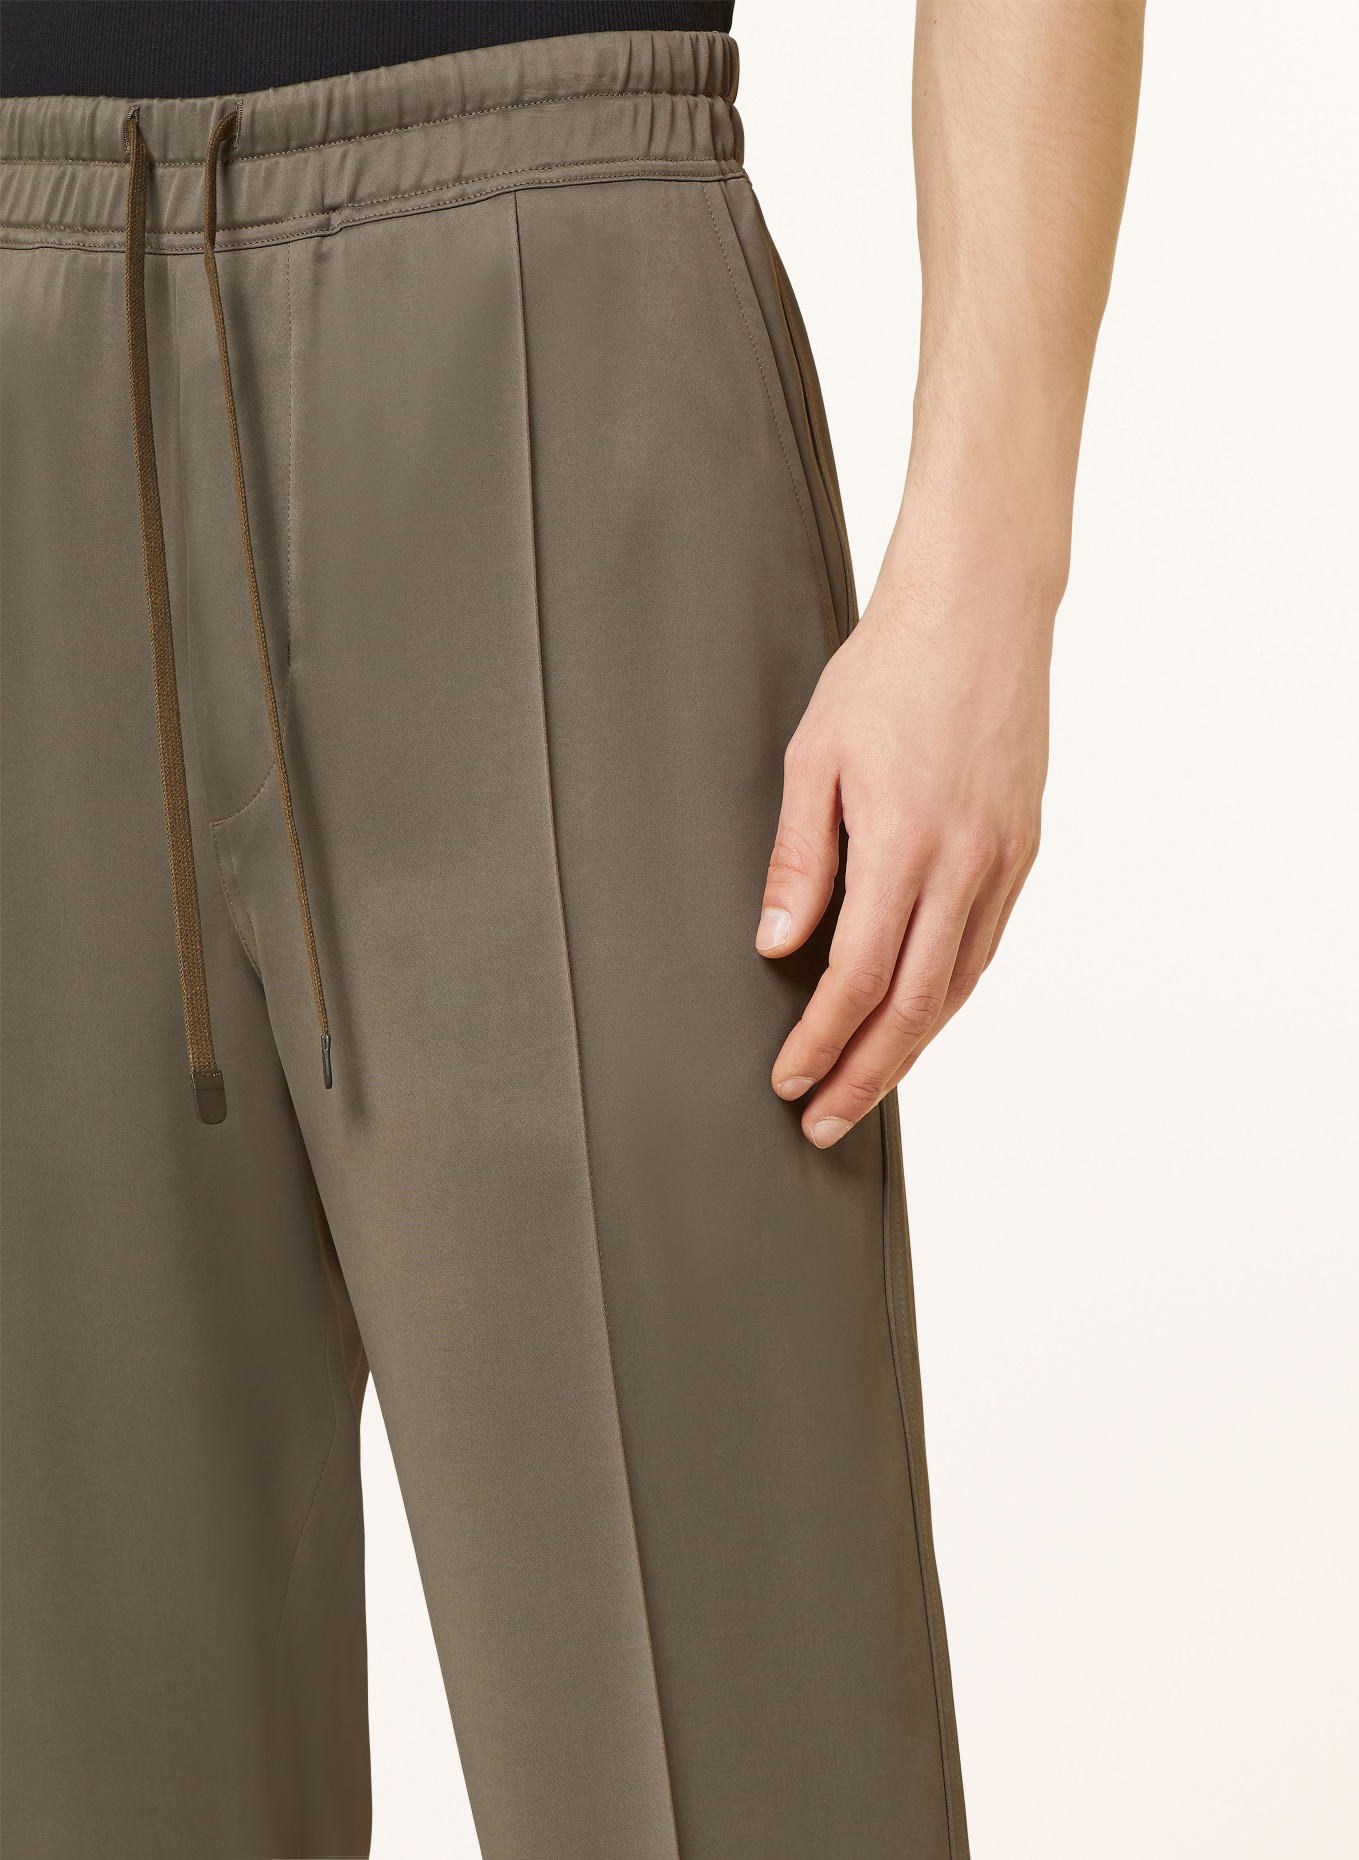 TOM FORD Pants in jogger style slim fit, Color: KHAKI (Image 5)